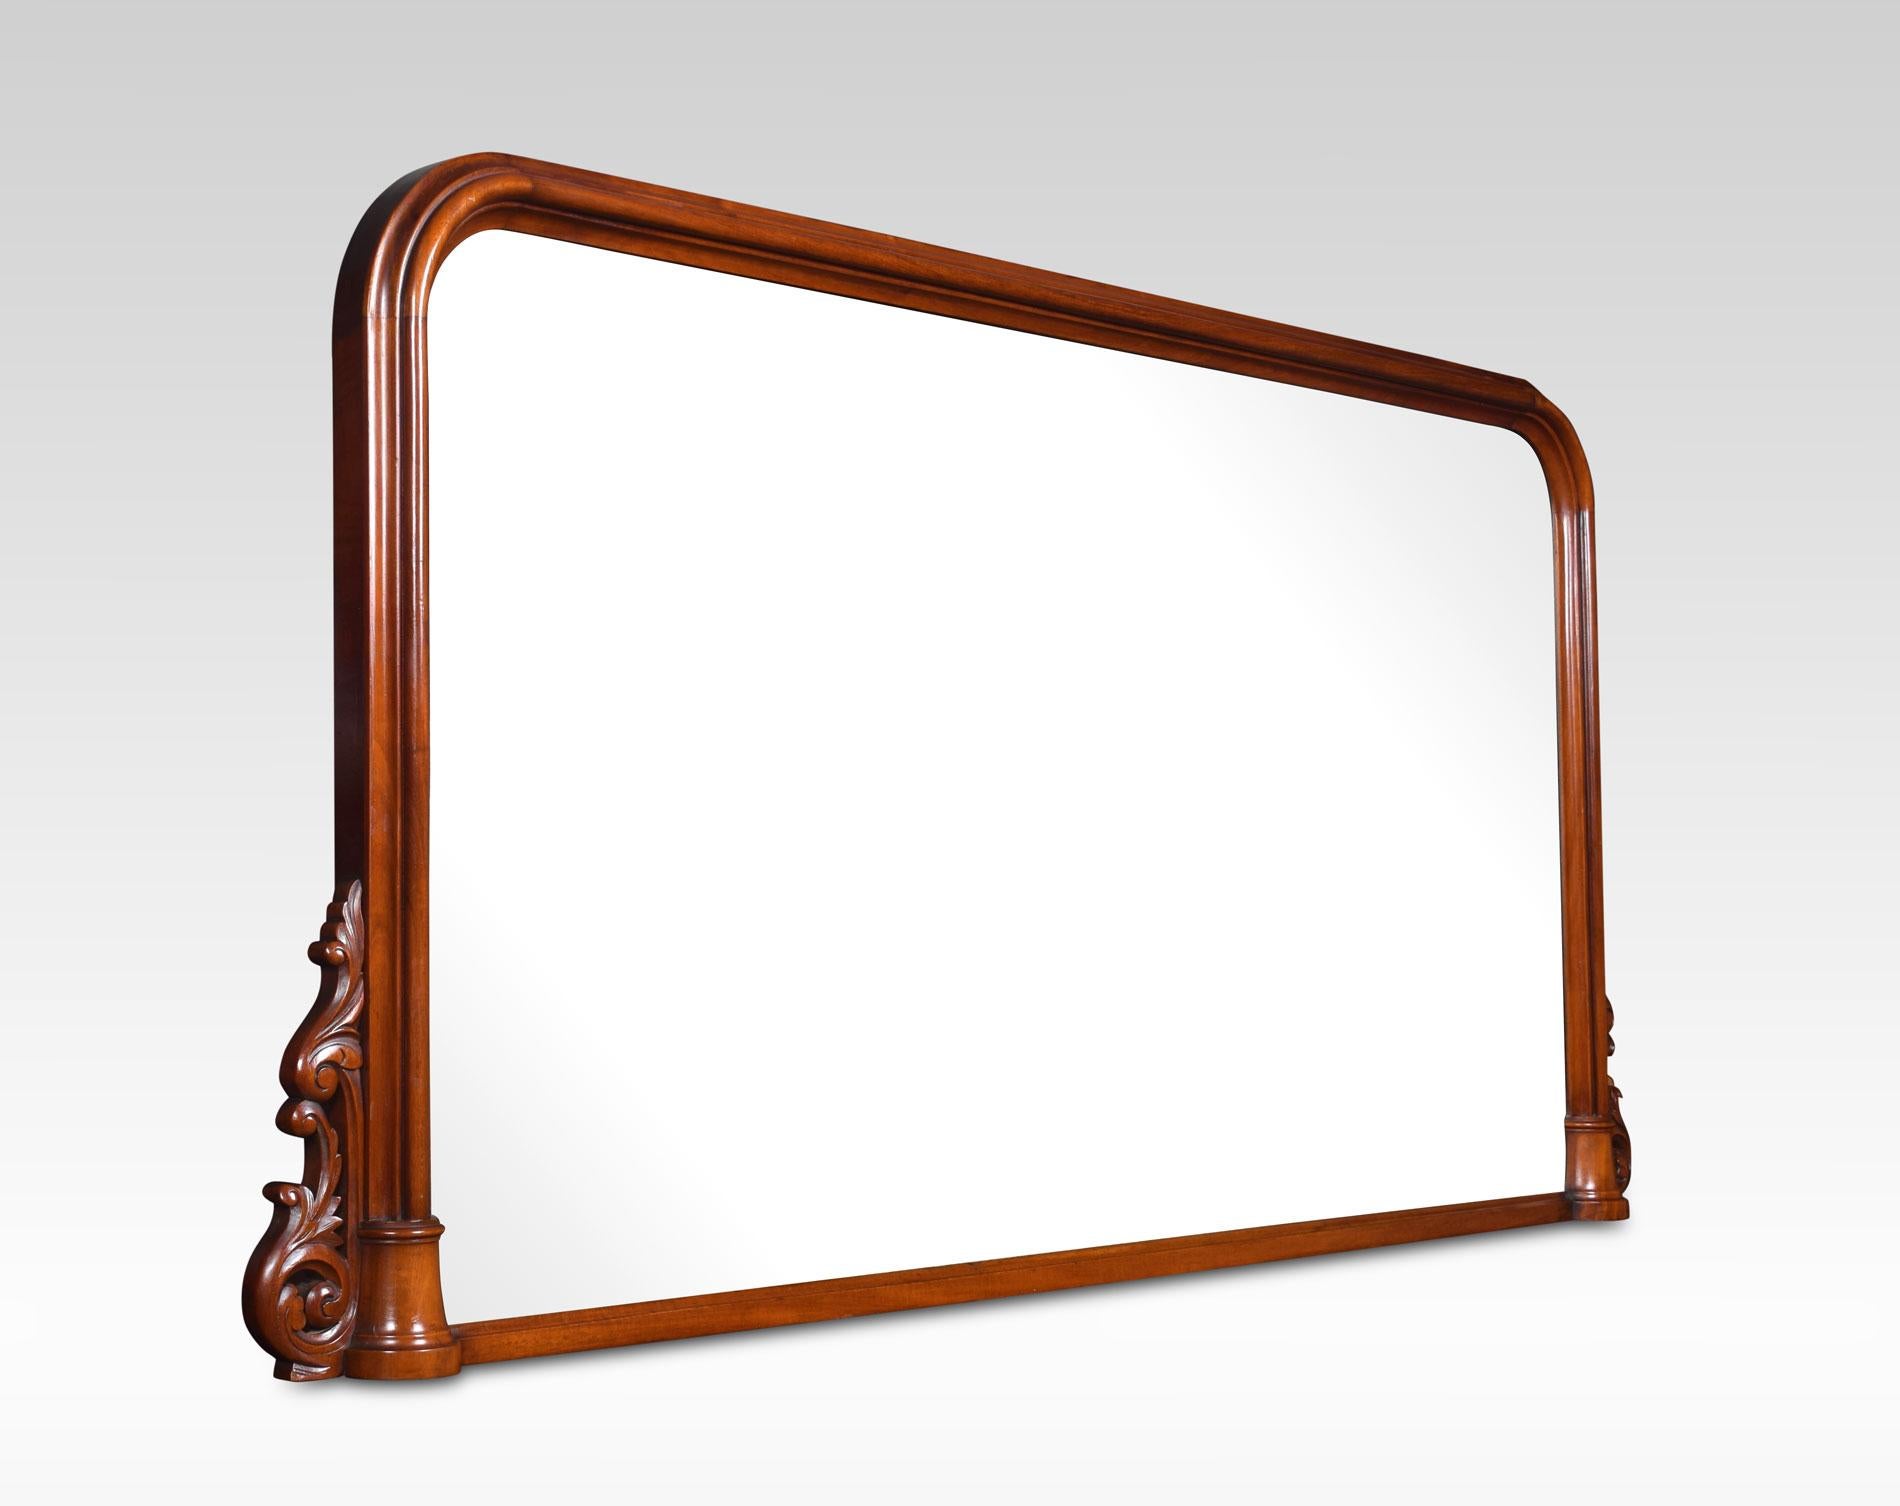 Victorian mahogany framed overmantle wall mirror, the shaped frame with carved scrolling ends surrounding the original mirror plate.
Dimensions:
Height 35.5 inches
Length 77 inches
width 4 inches.